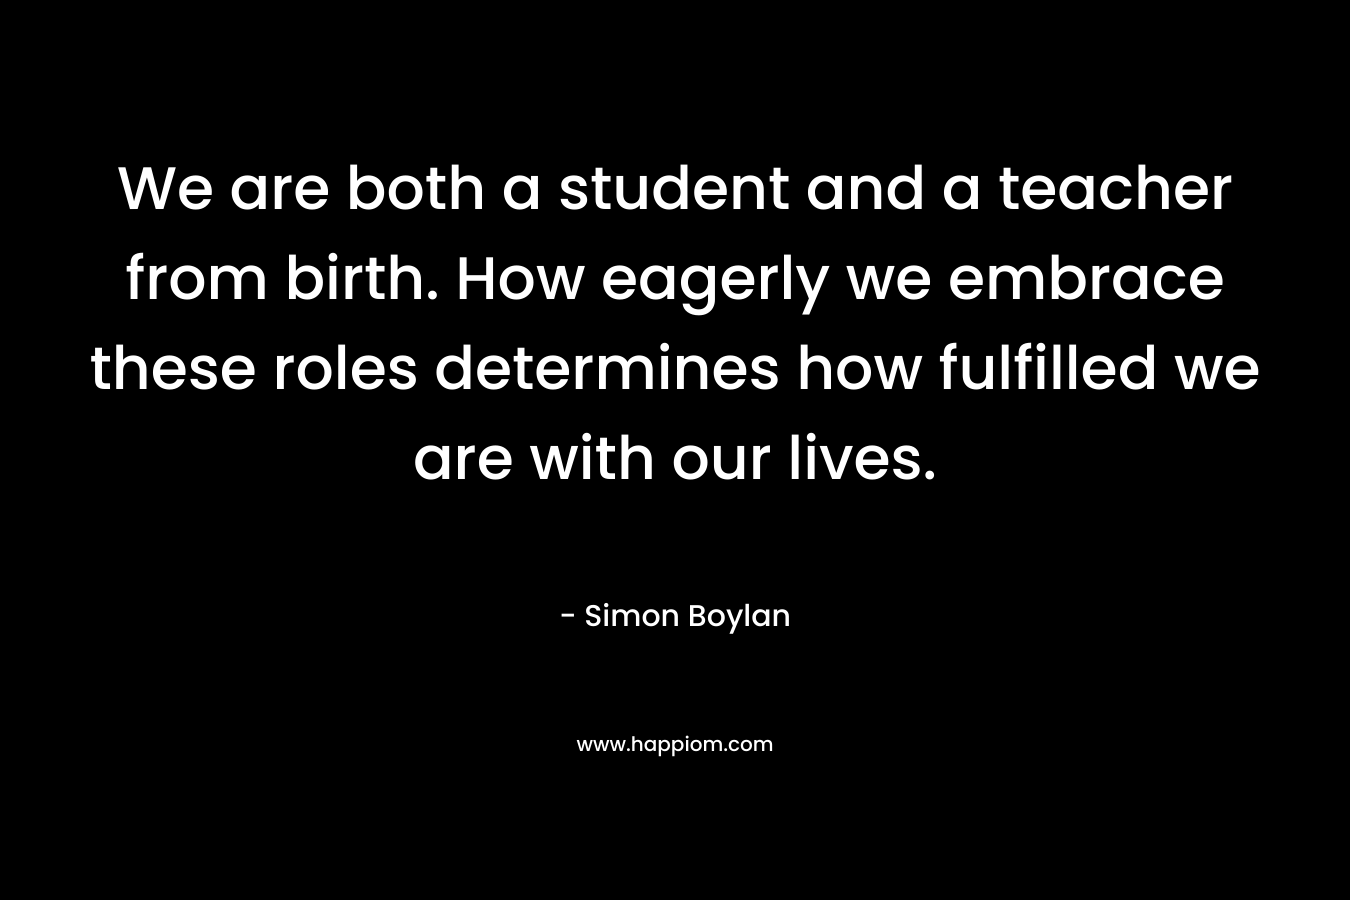 We are both a student and a teacher from birth. How eagerly we embrace these roles determines how fulfilled we are with our lives.